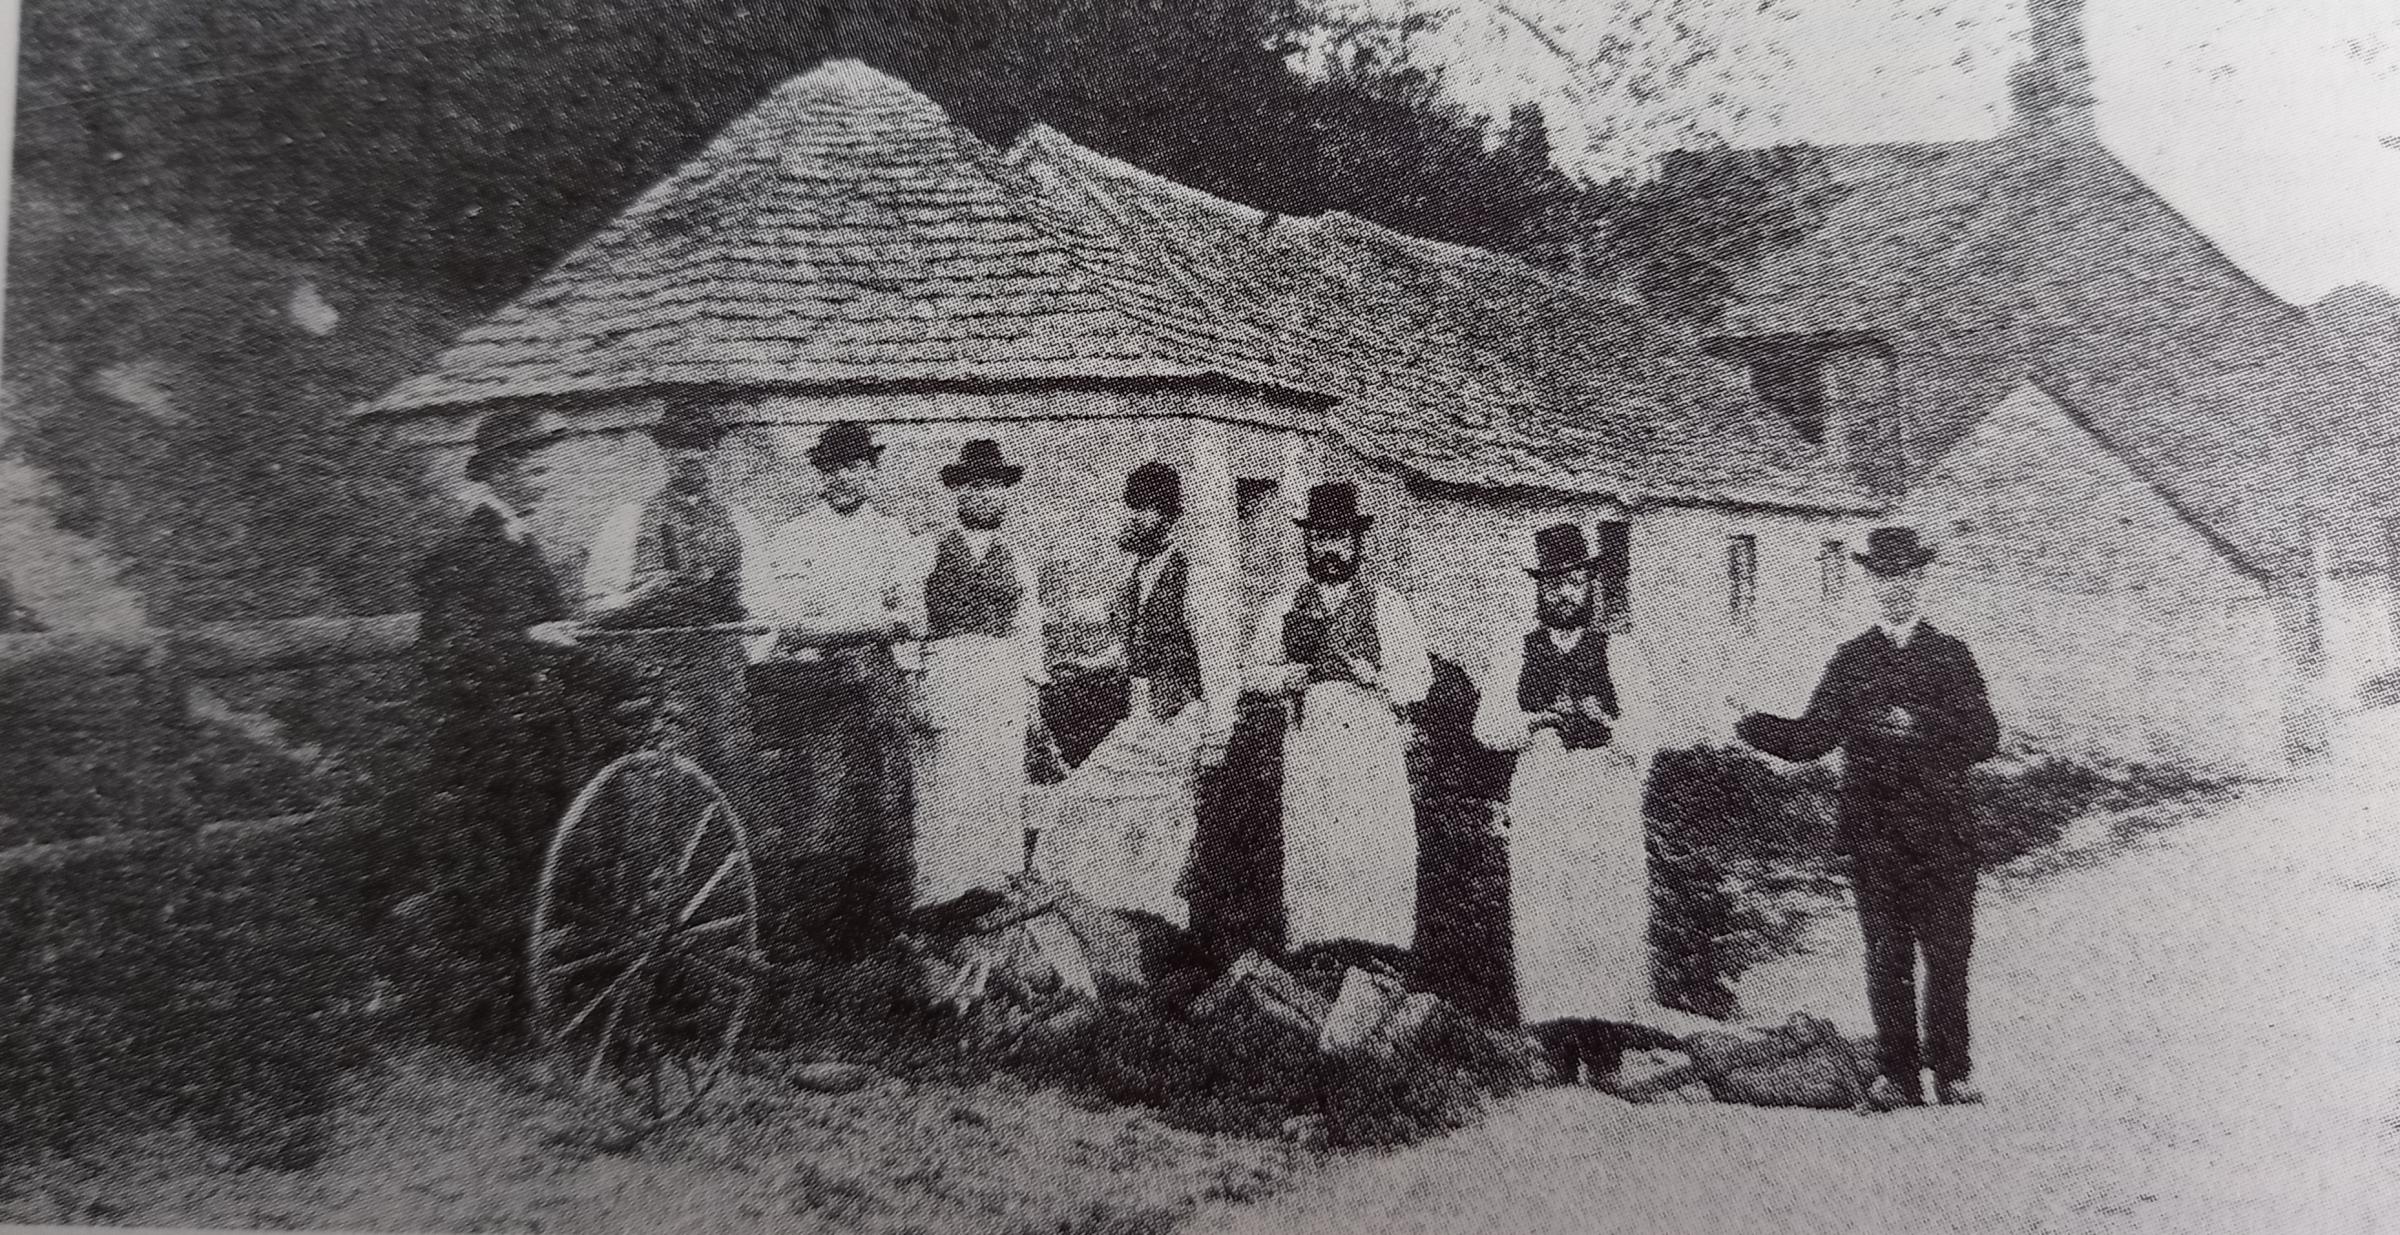 APRONS ON: Village tradesmen in south Worcestershire in 1900, likely to have decided views on women in business